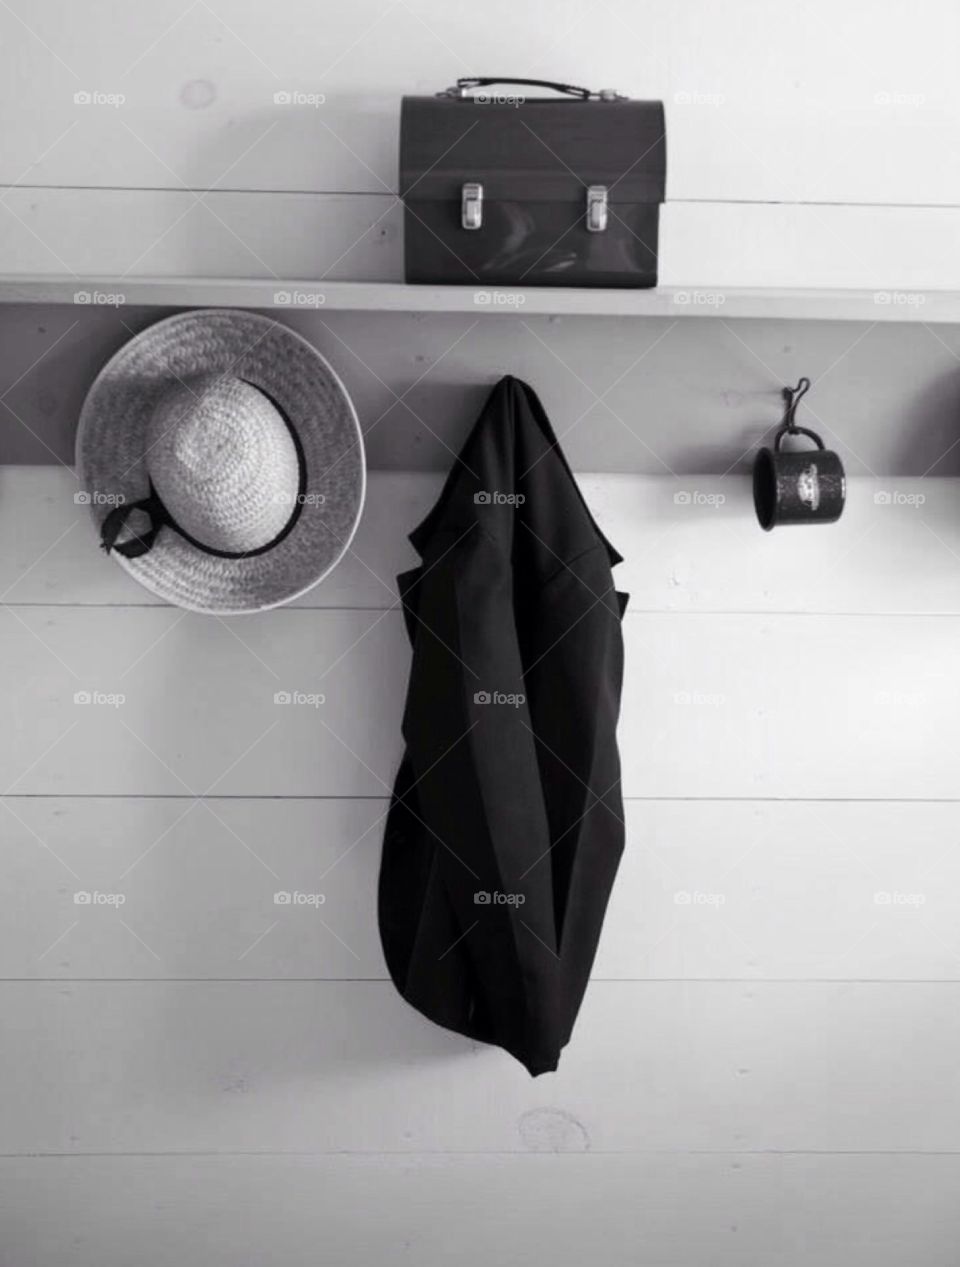 Amish living. Amish entrance way into a home , a hat , cup and lunch box hang on a wall.